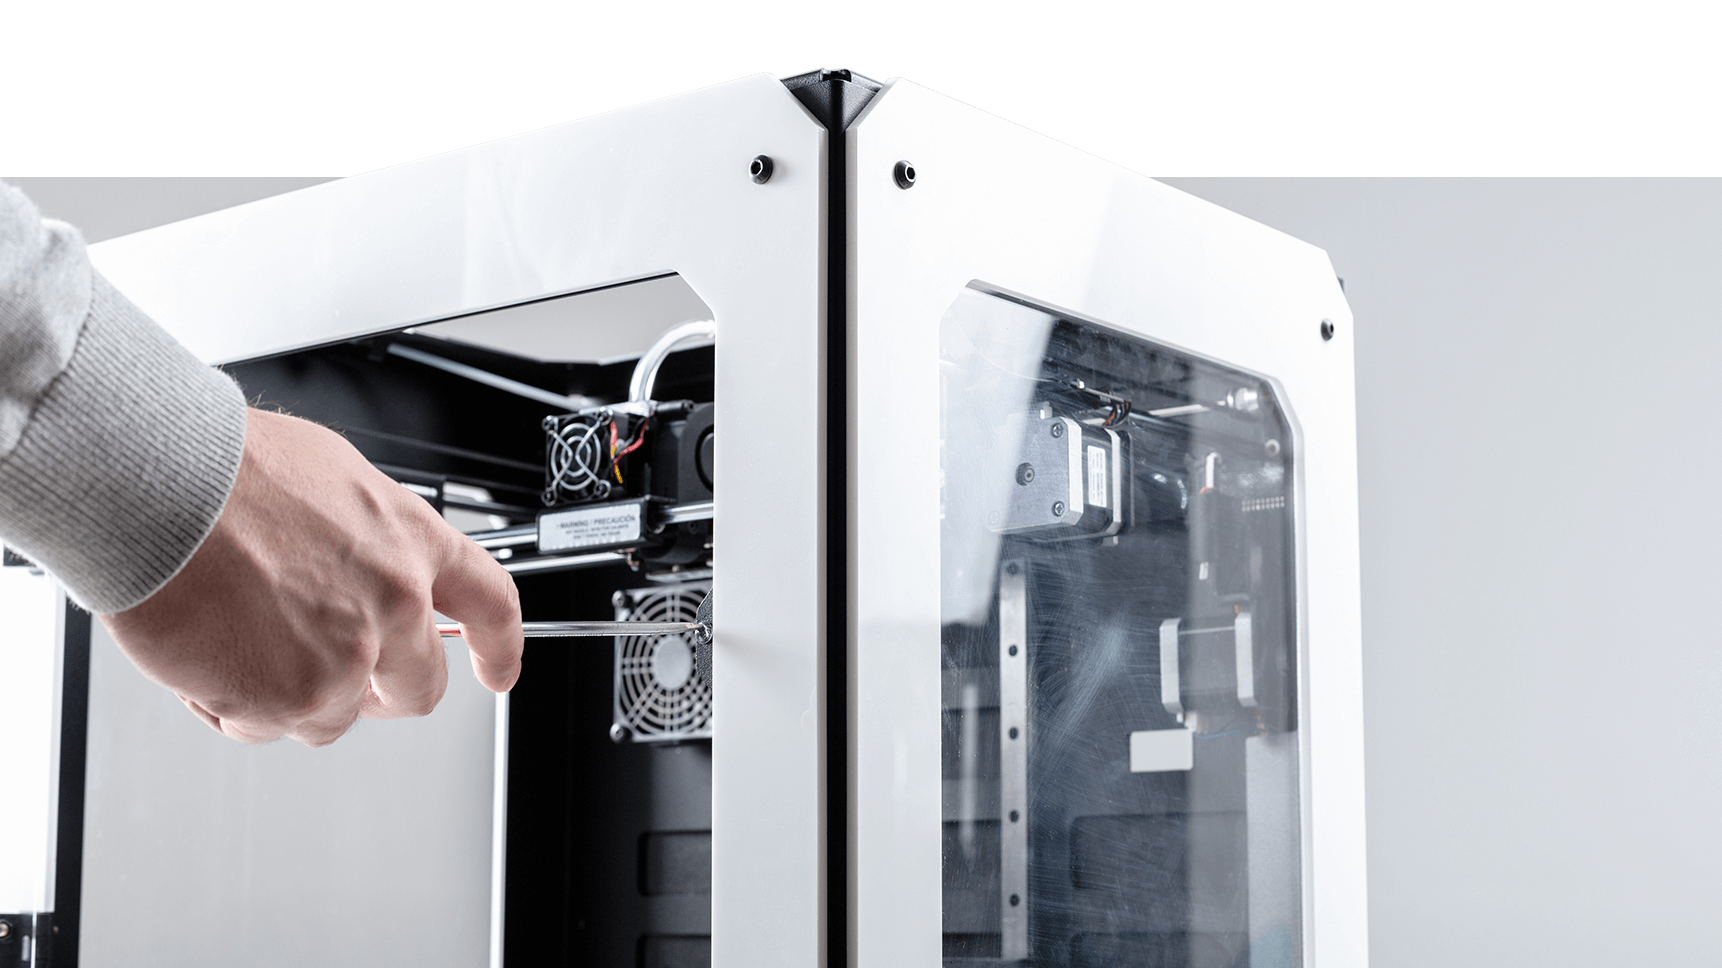 3D printers are as vulnerable as any other connected componen